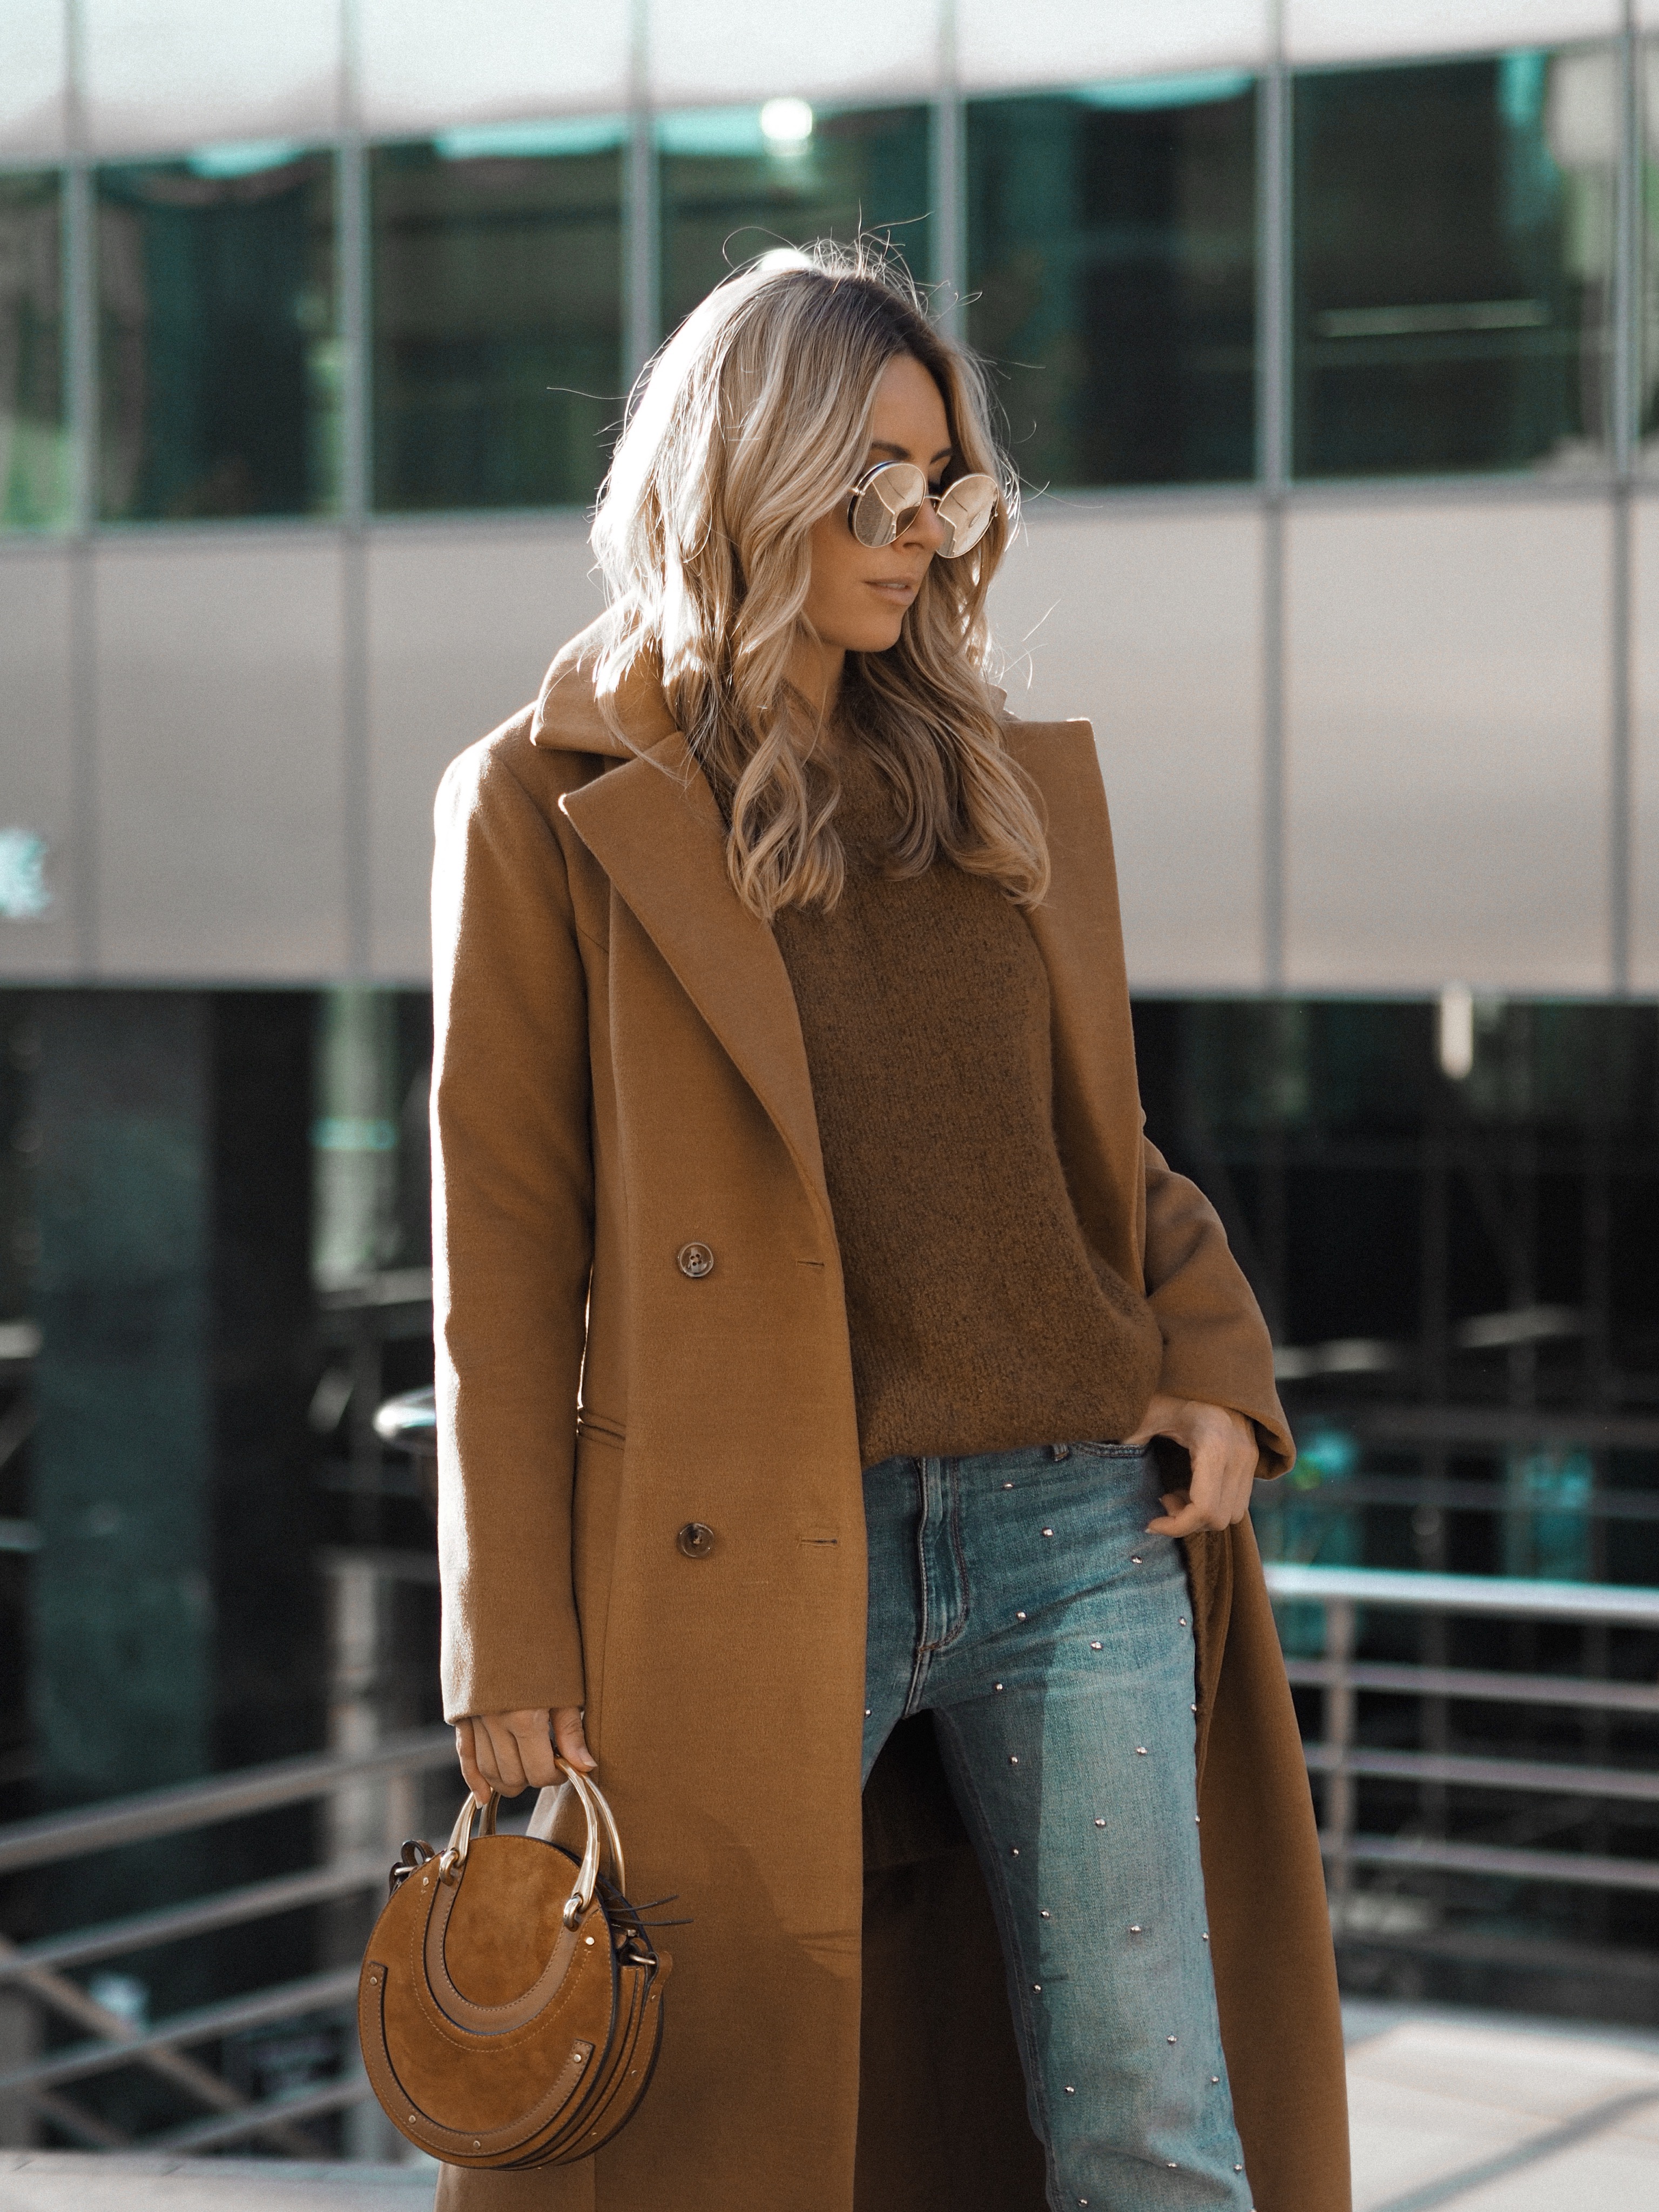 how to dress casual chic